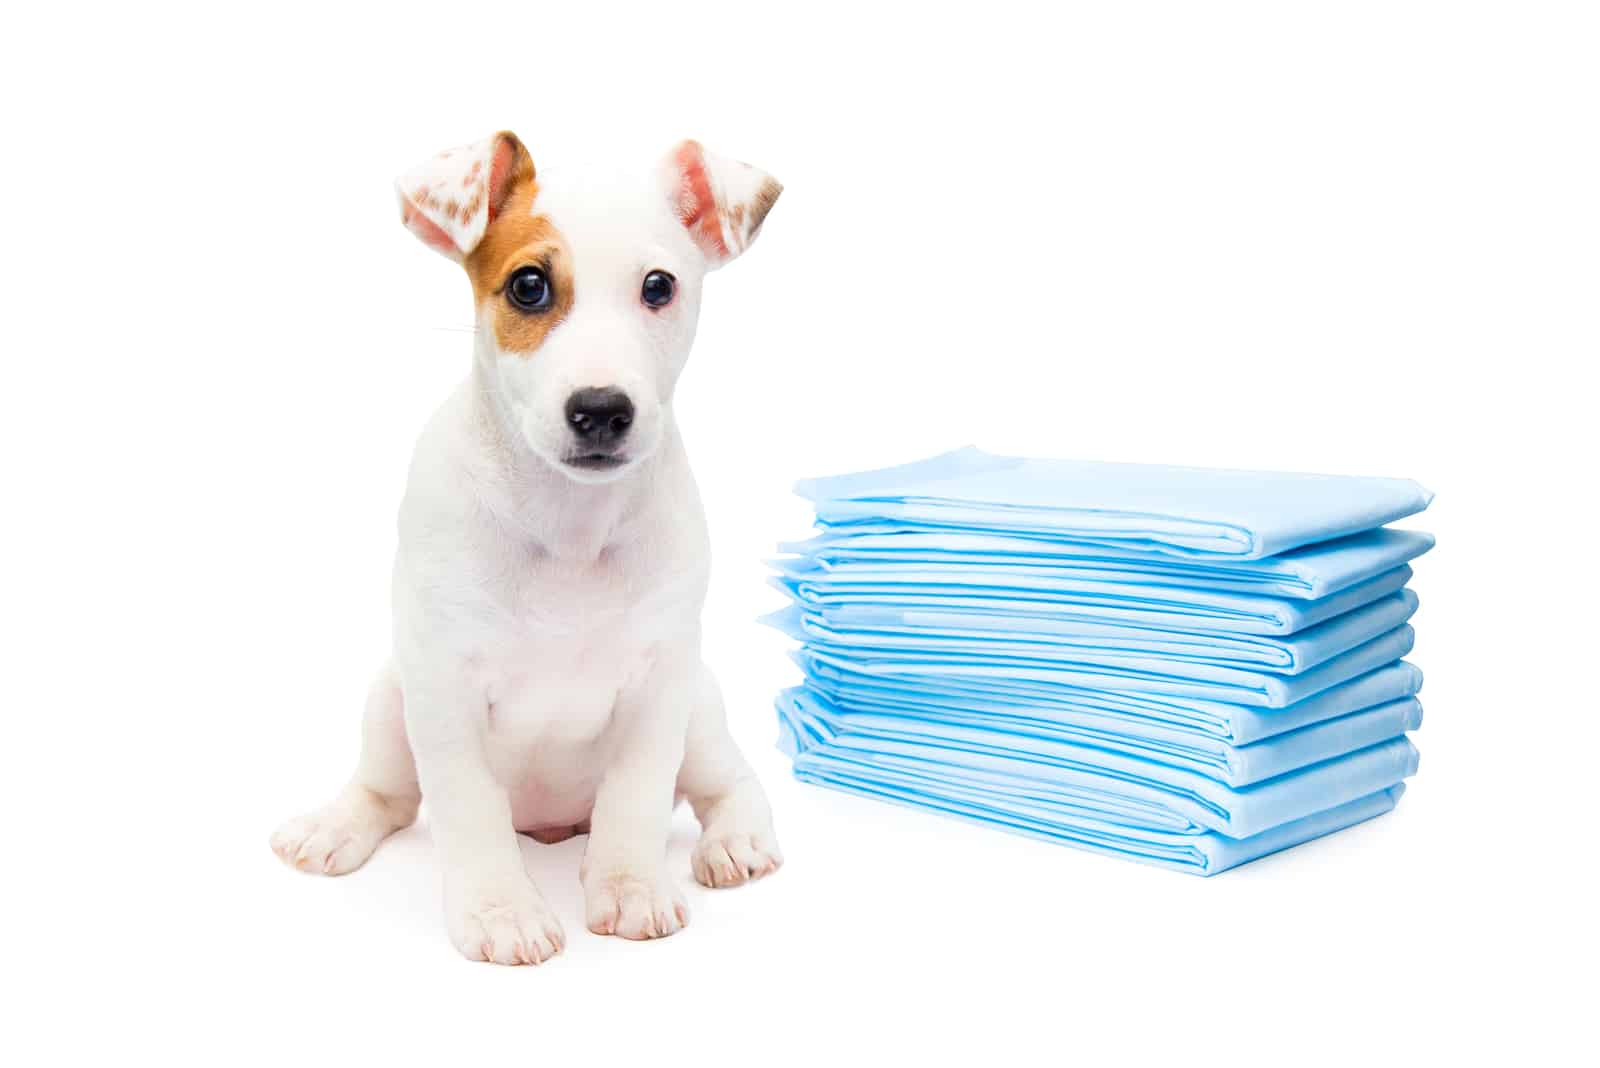 Jack Russell Terrier puppy sitting with diapers